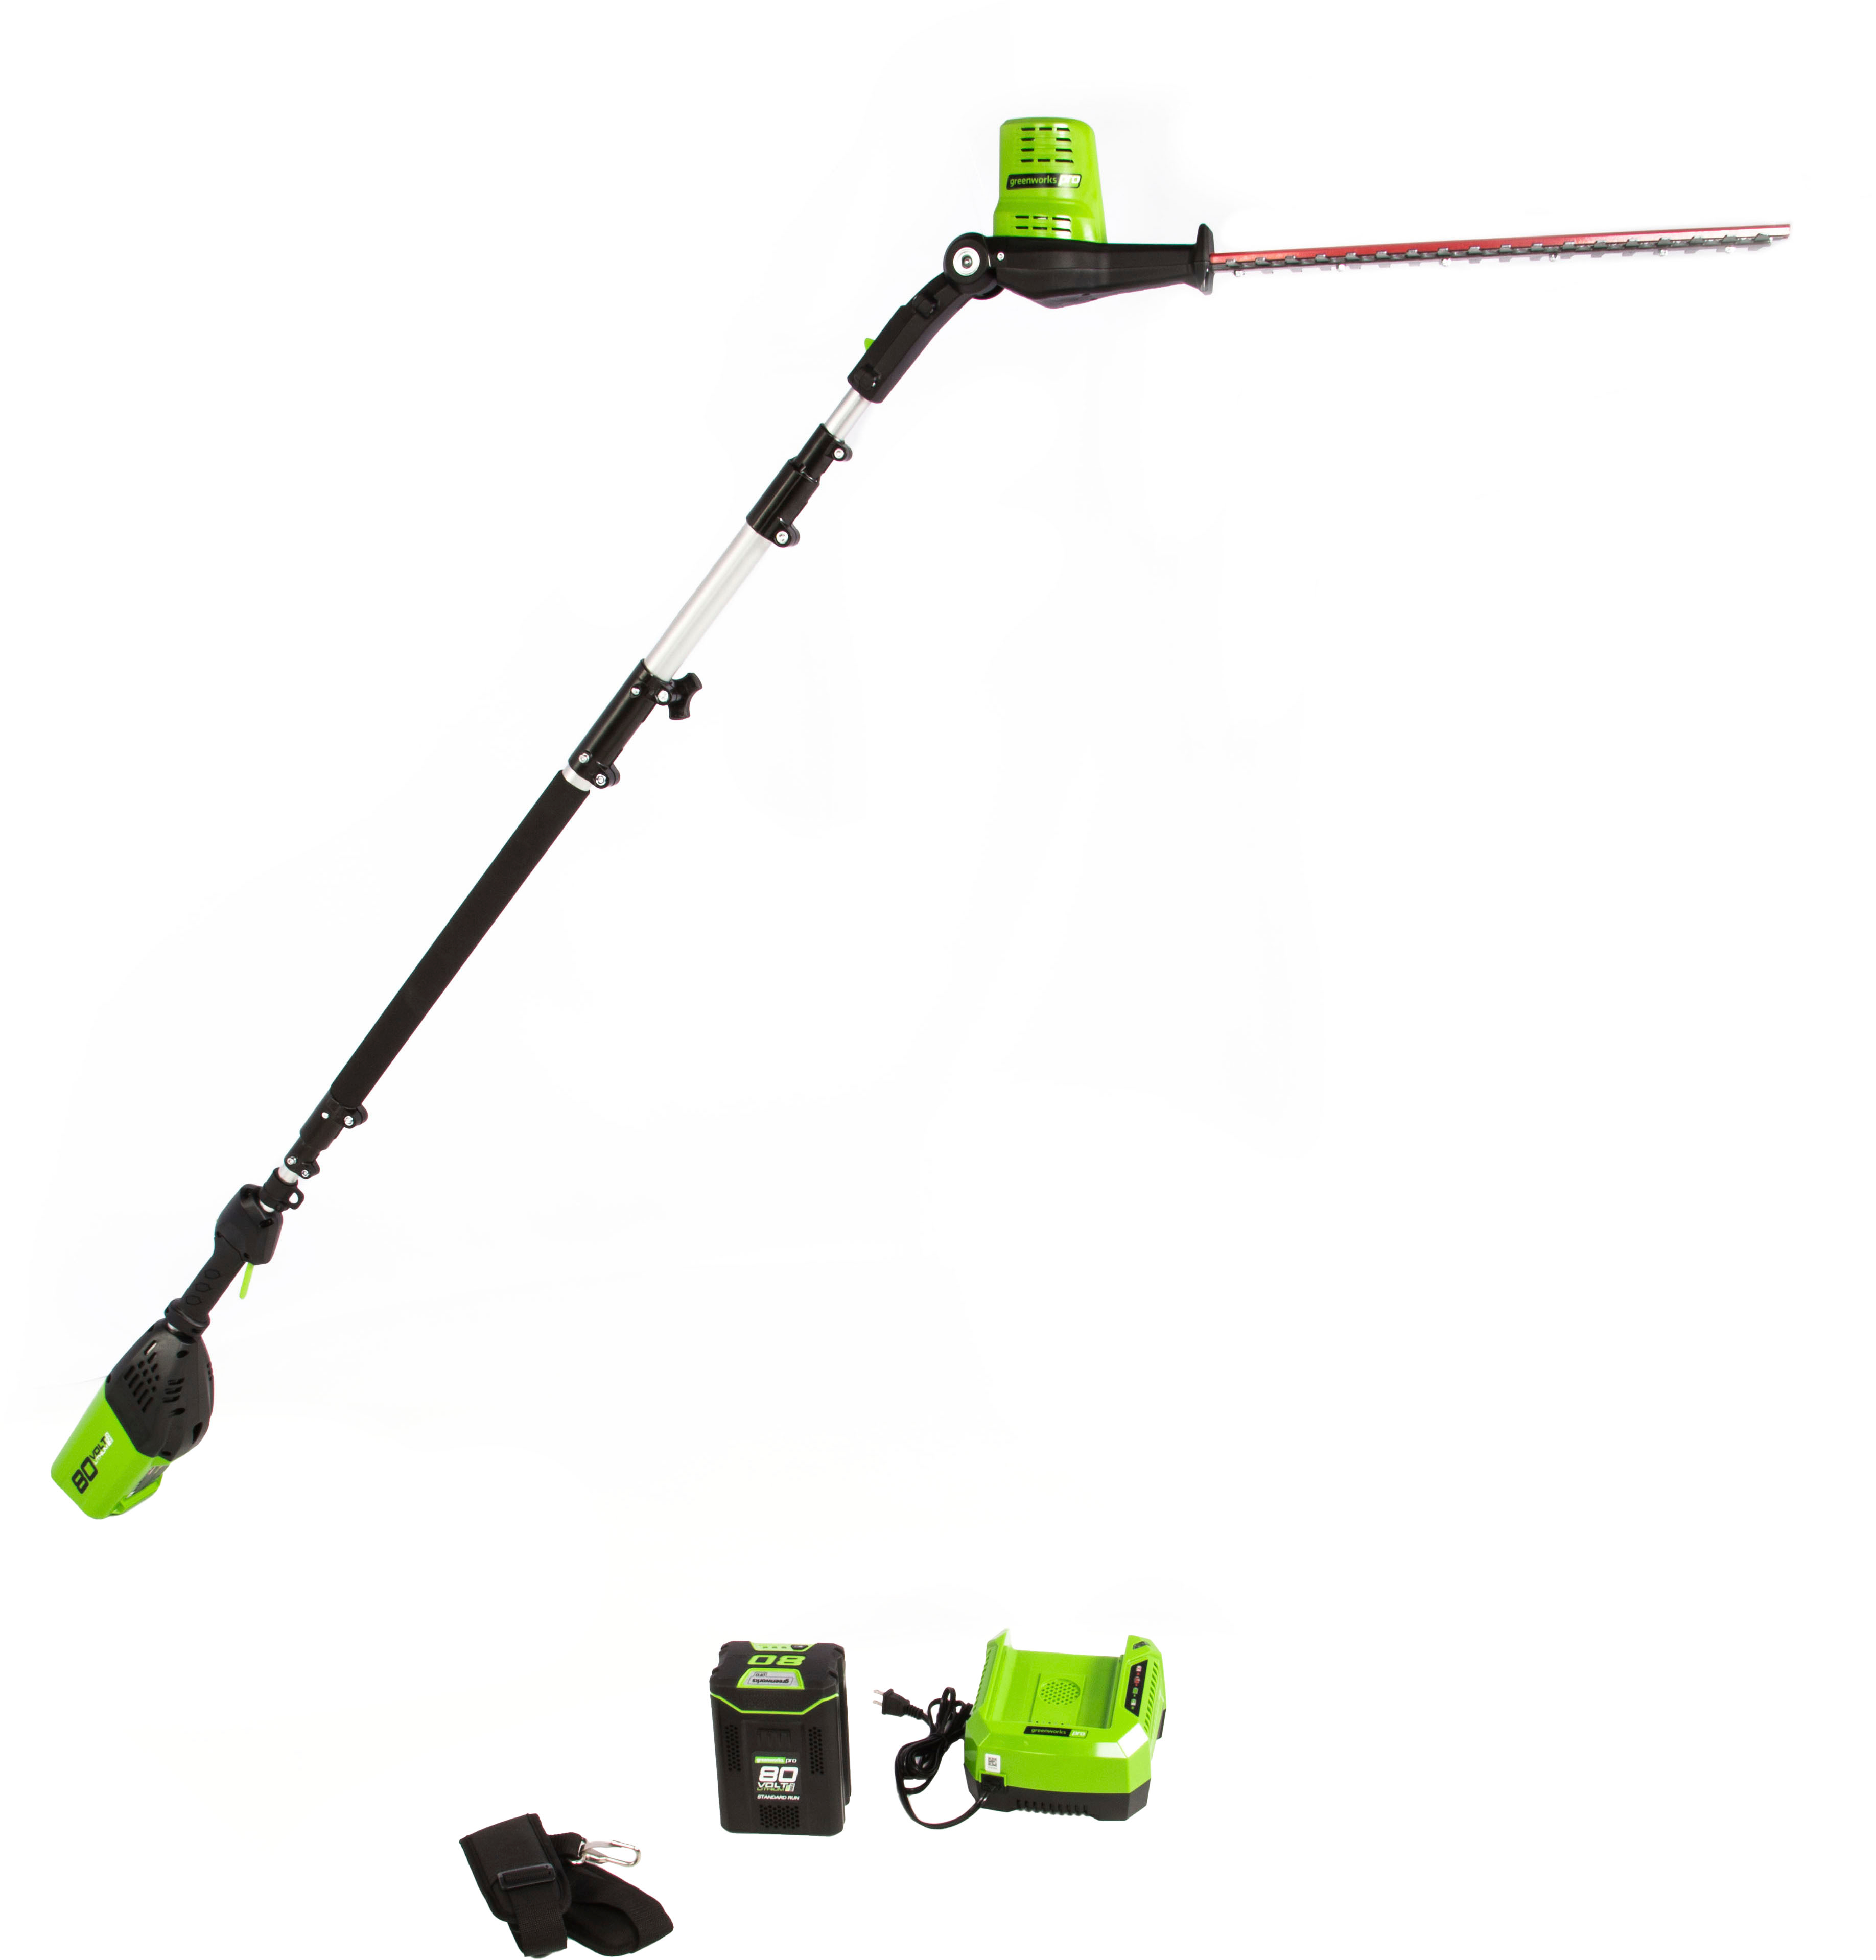 Greenworks 80V 20” Brushless Pole Hedge Trimmer with 2.0 Ah Battery and  Charger Green 2305102 - Best Buy